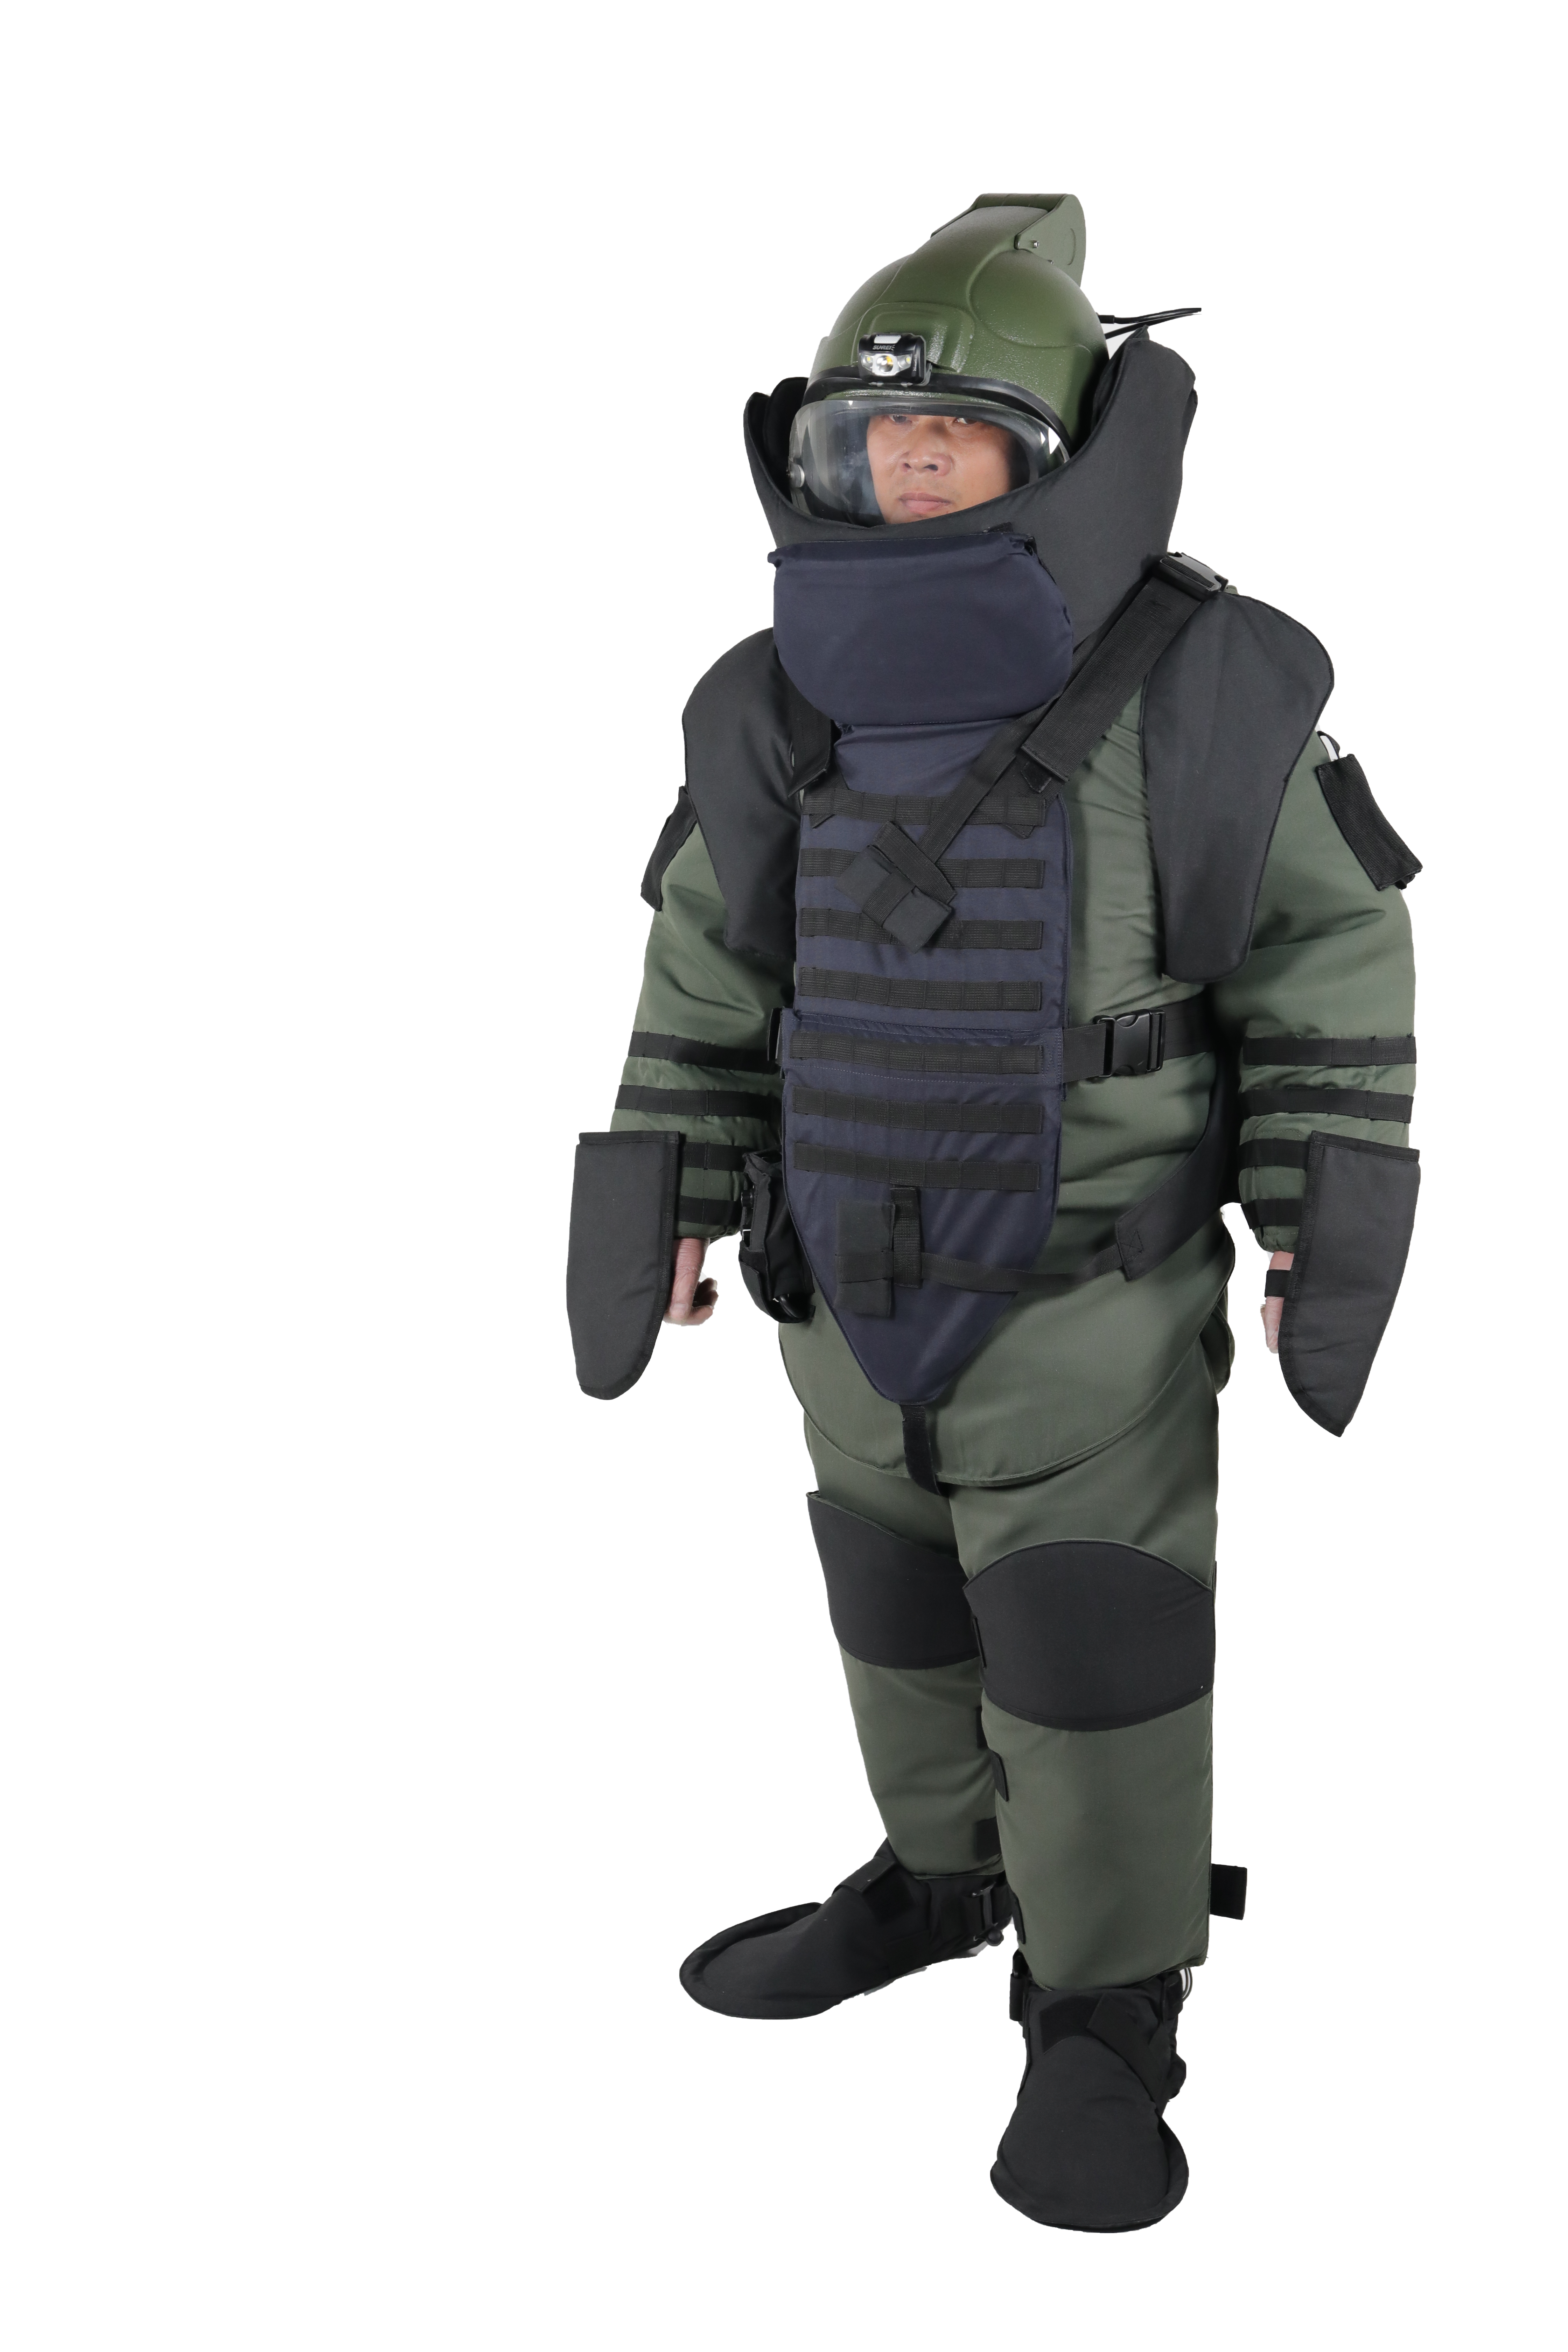 Good Wholesale Vendors Non-Magnetic Eod Tool Set - Police Military Security EOD bomb disposal suit – Heweiyongtai